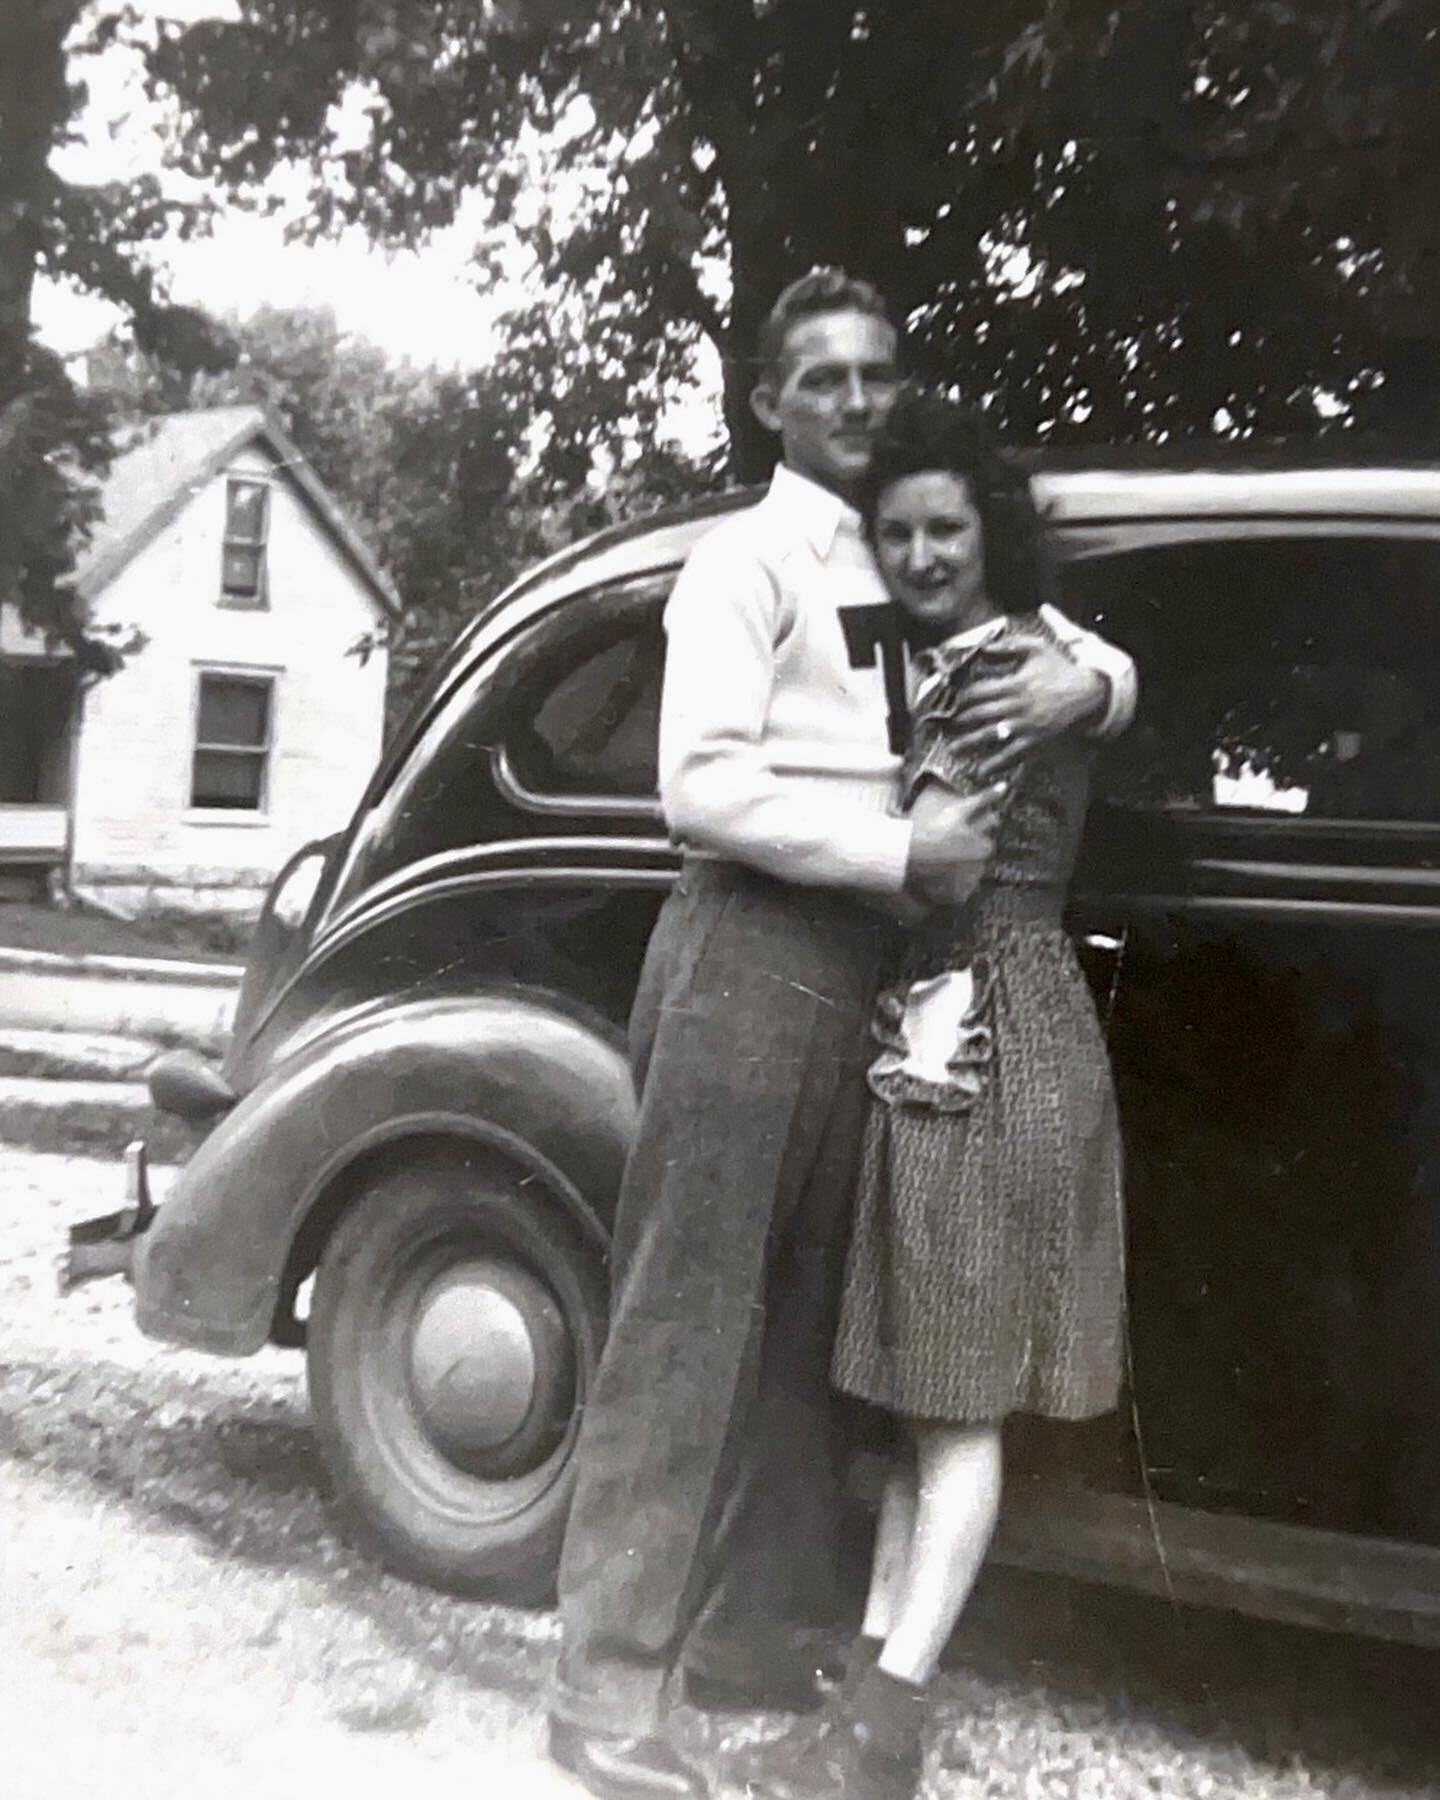 T R U E  L O V E 

Betty and Donald True fell in love in 1941 in Bedford, IN. A Navy man, Don wrote love letters to Betty all through his service in WWII and finally worked up the courage to ask her to marry him upon his return. When Betty&rsquo;s pa